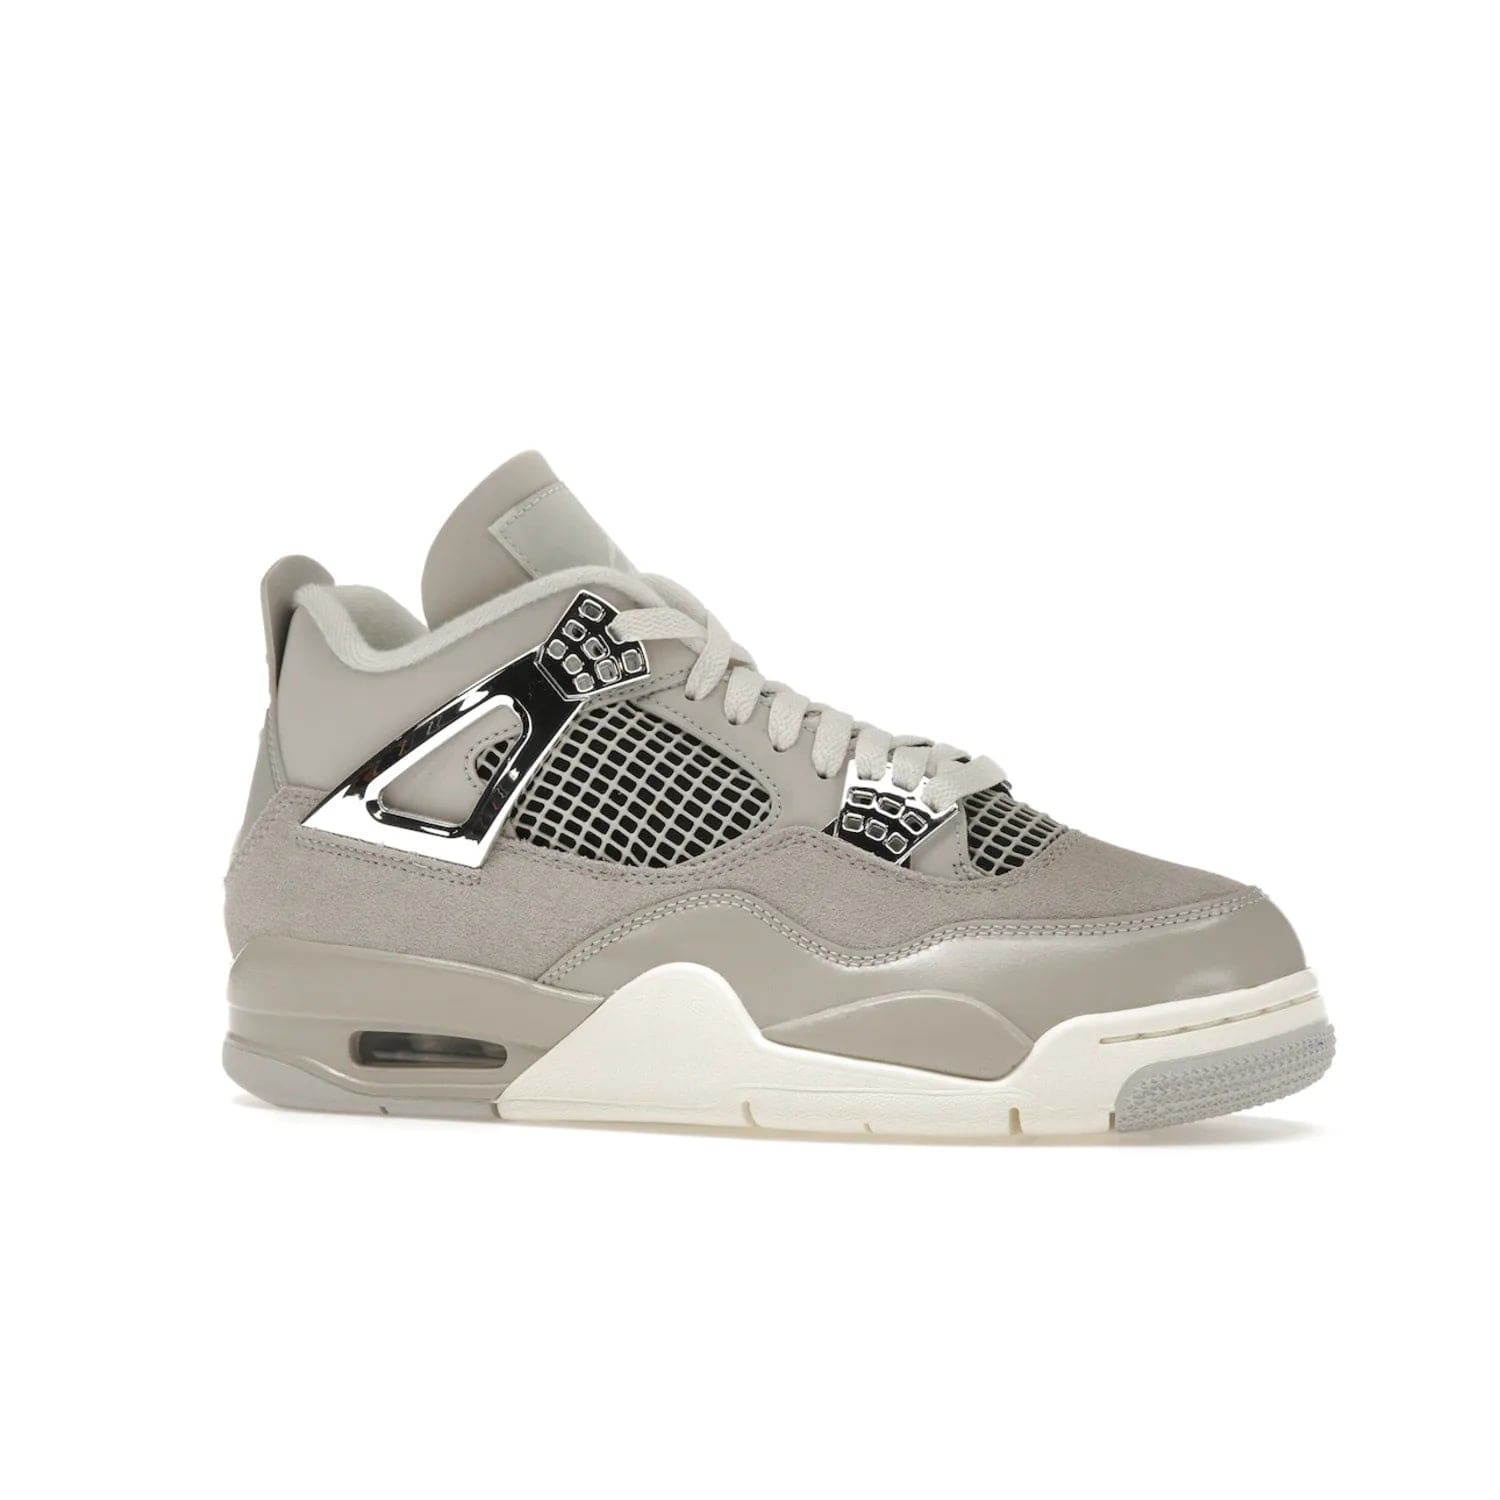 Jordan 4 Retro Frozen Moments (Women's) - Image 3 - Only at www.BallersClubKickz.com - The Jordan 4 Retro Frozen Moments is a stylish blend of classic design elements and modern tones. Featuring suede and leather overlays in a light iron-ore, sail, neutral grey, black, and metallic silver colorway. Get this iconic high-performance sneaker for $210.